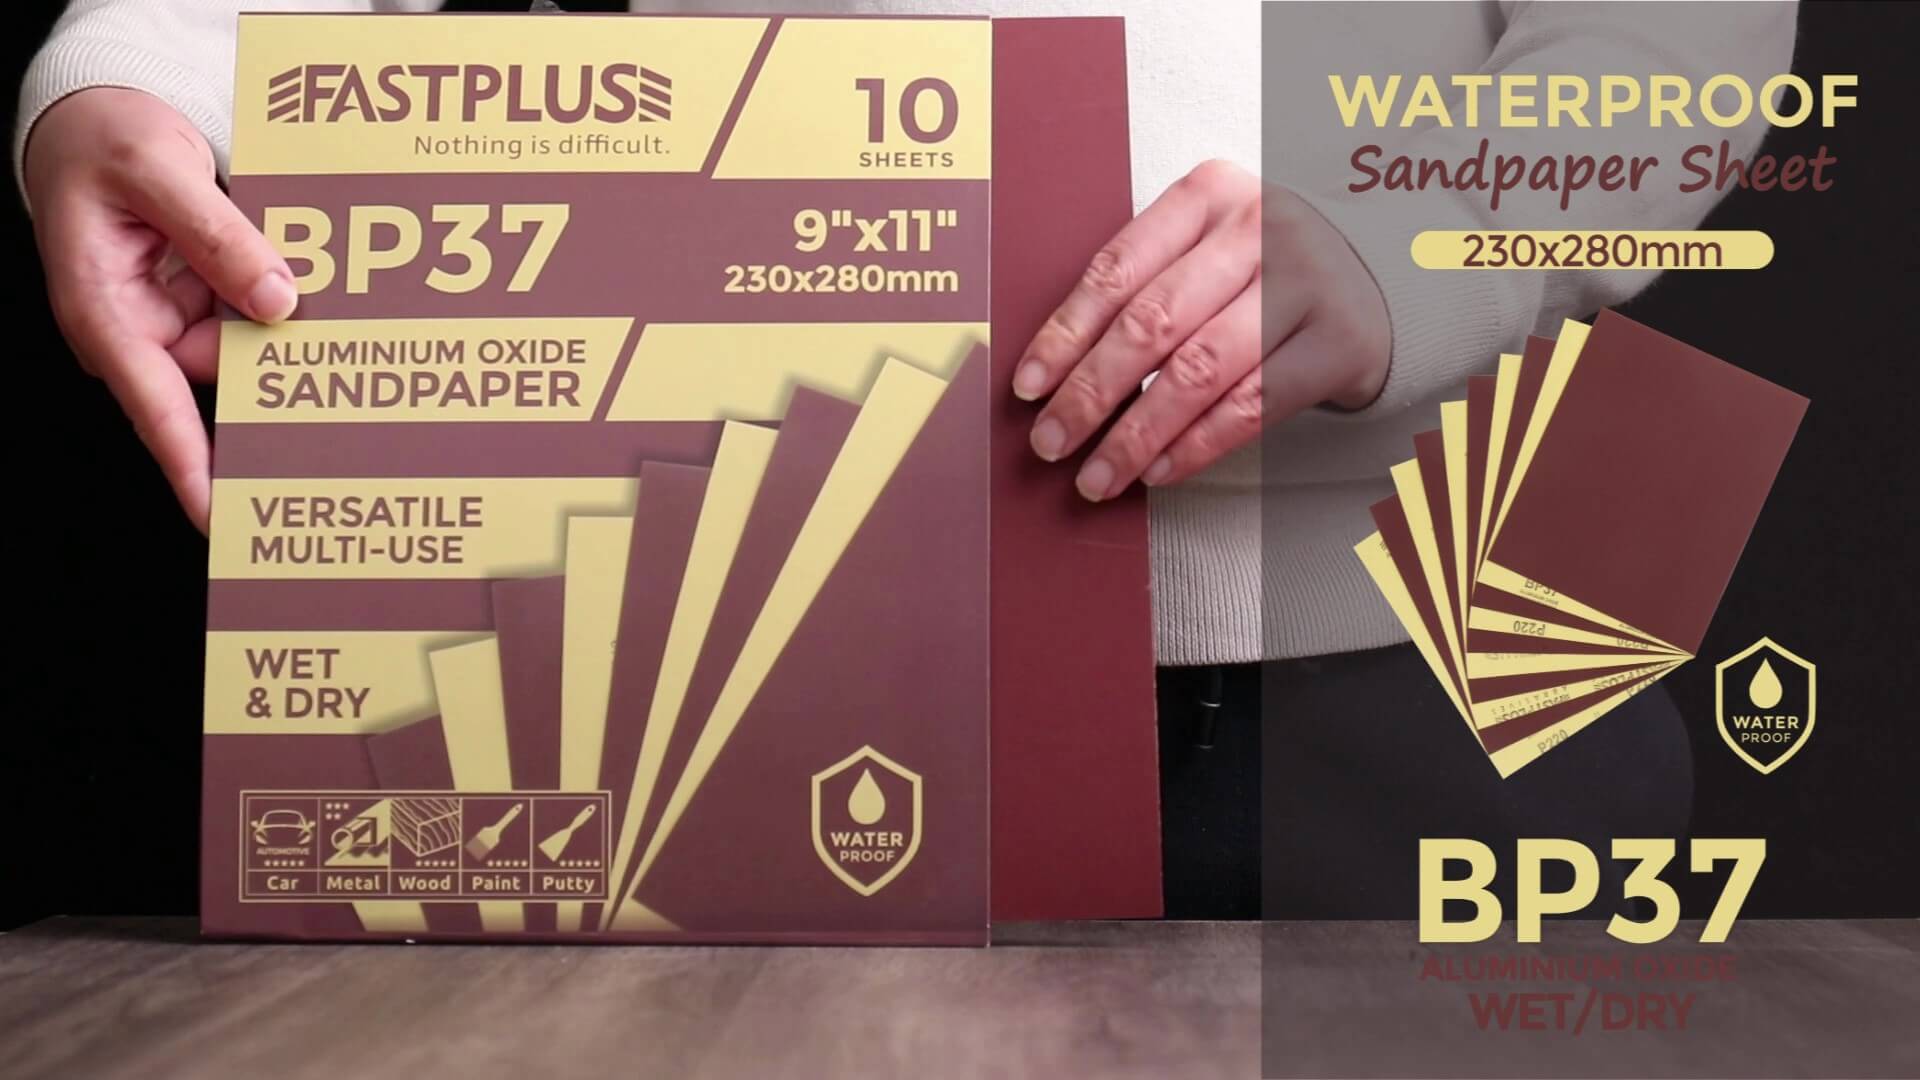 Load video: wet or dry sandpaper sheet BP37 230x280mm aluminium oxide by fastplus abrasives Nassschleifpapier Blatt BP37 230x280mm Aluminiumoxid von Fastplus Schleifmittel